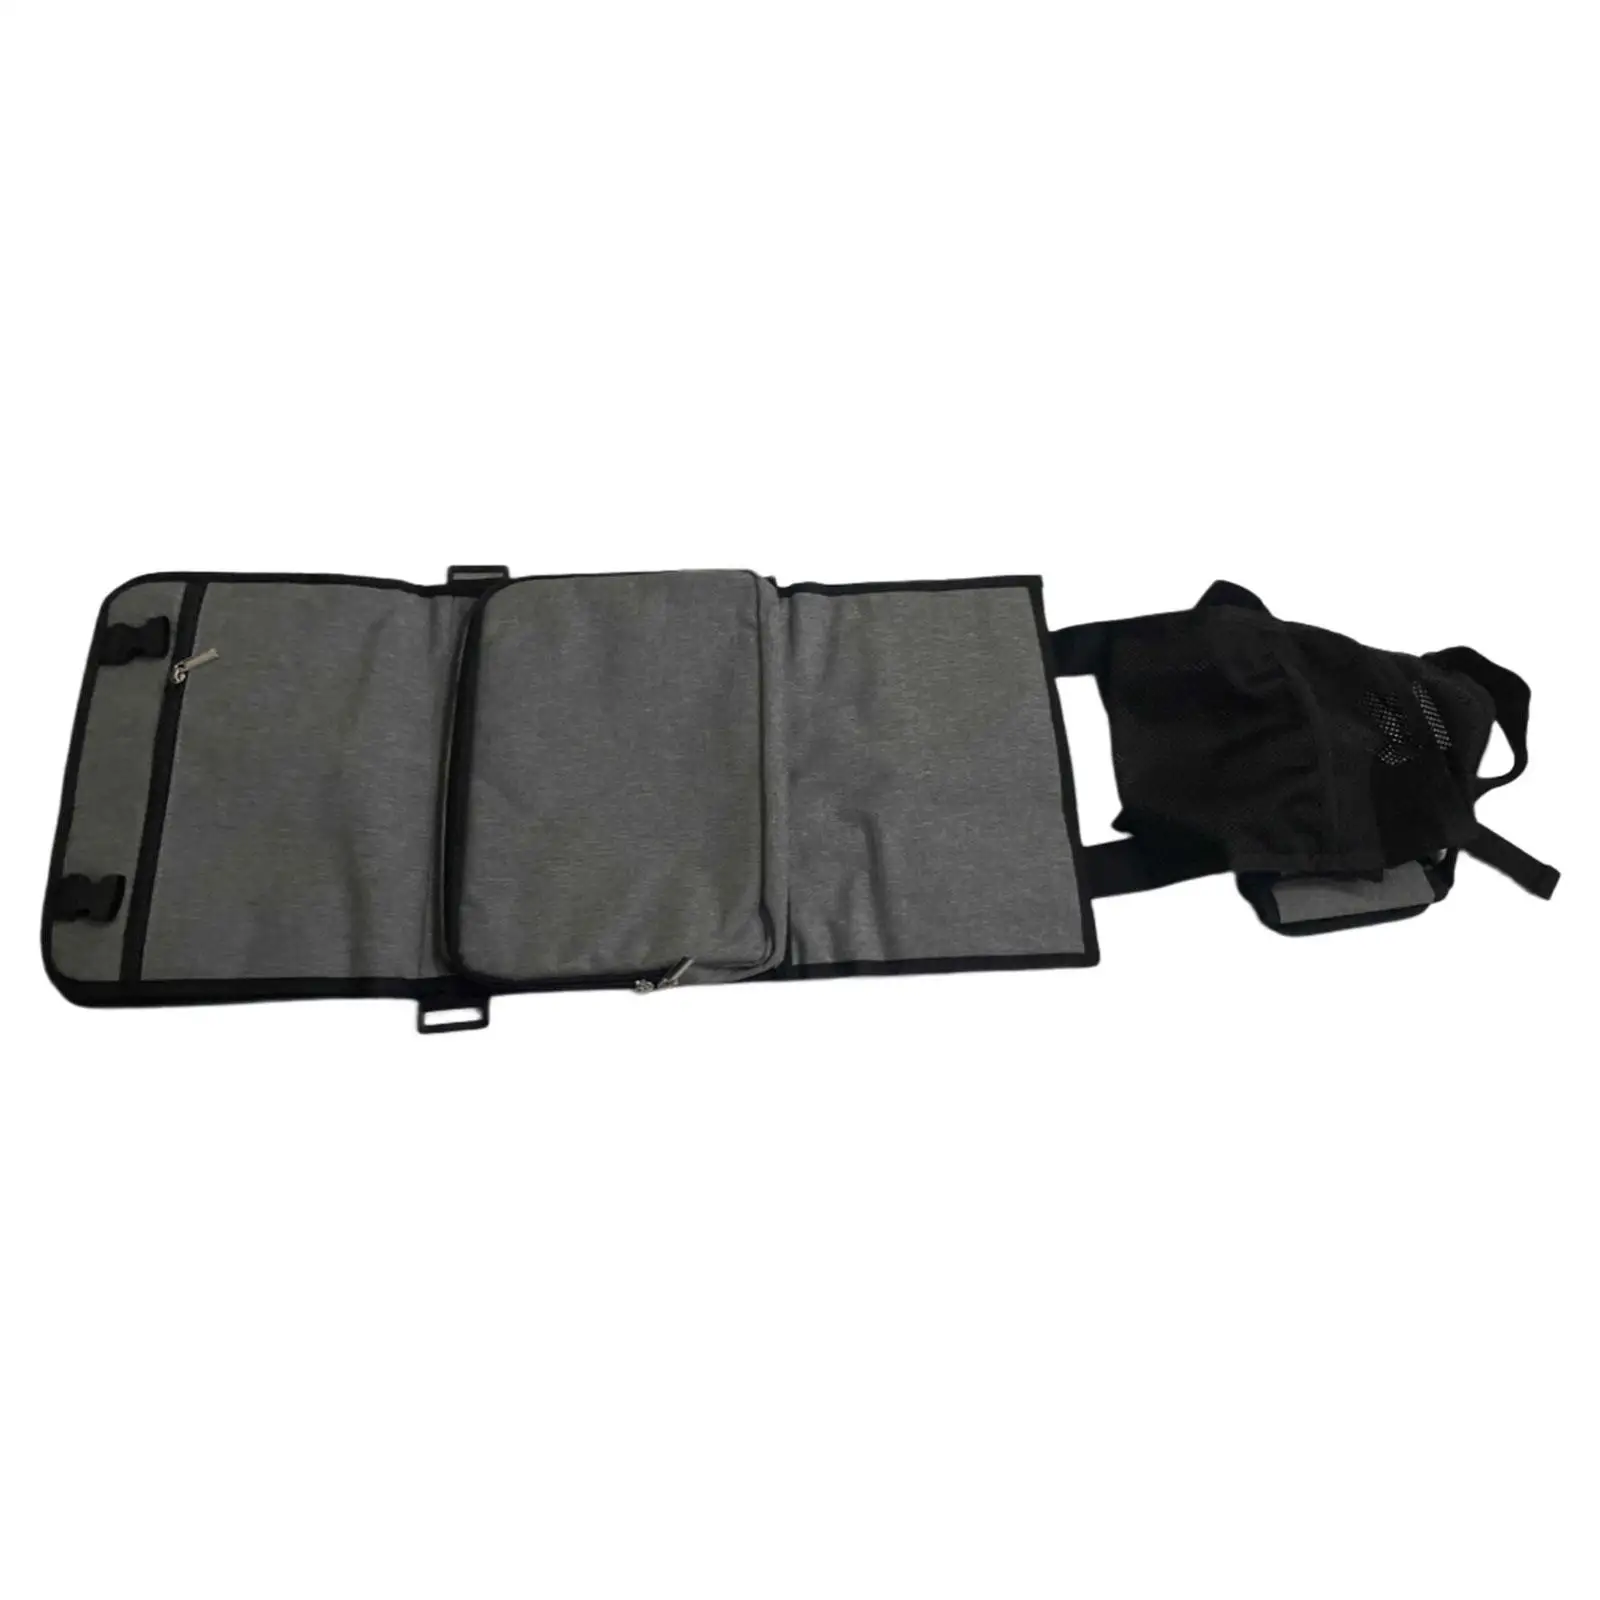 PC Tower Carrying Strap with Handle Multiple Pockets for Keyboard Mouse and Extra Accessories